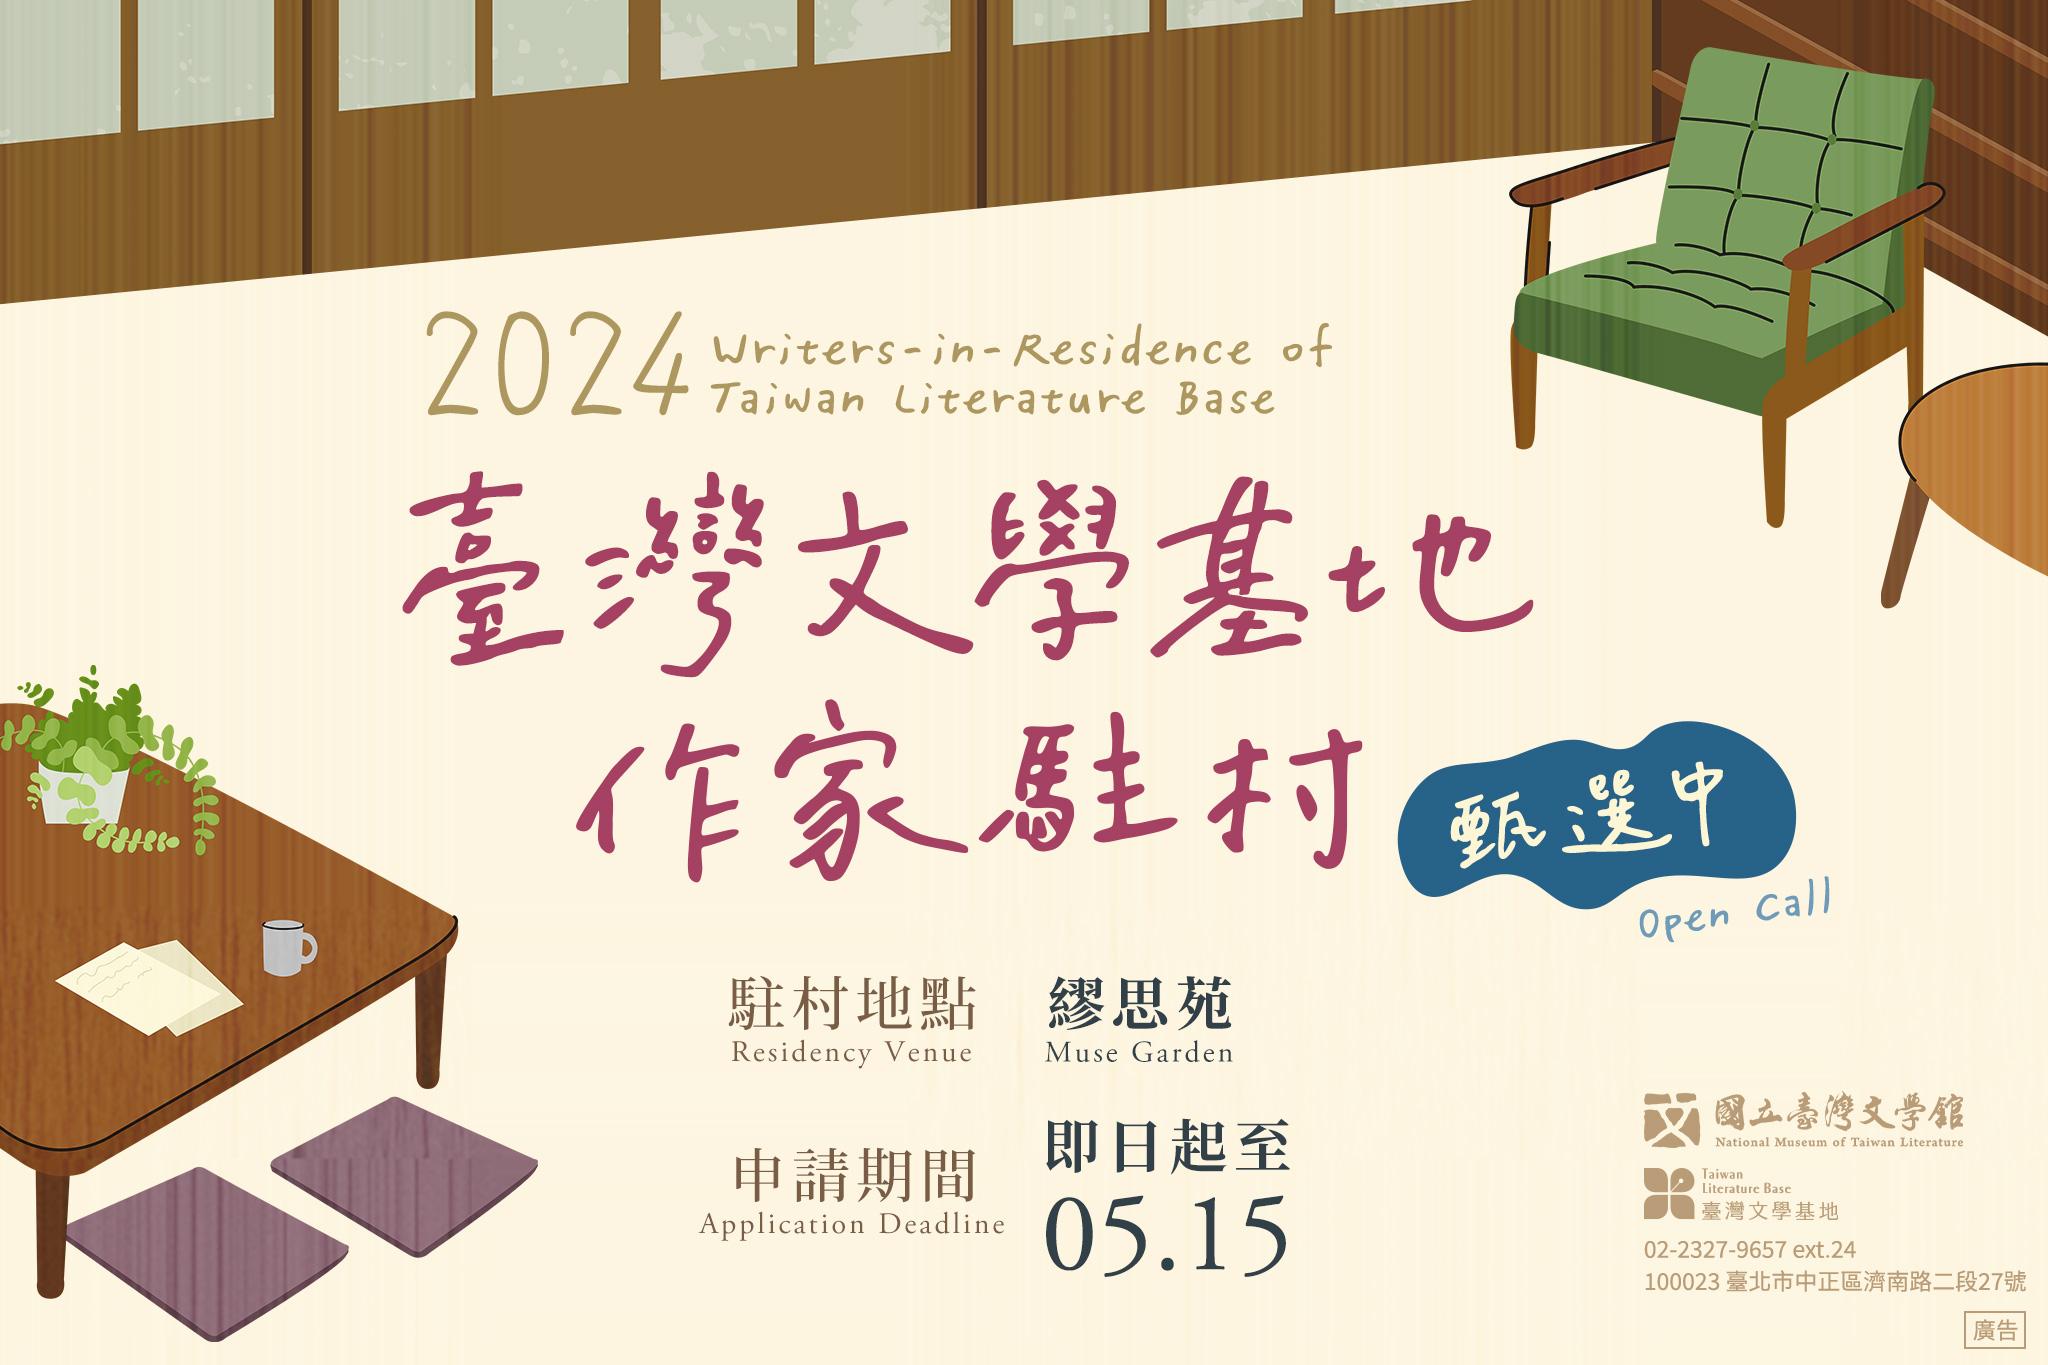 2024 Writers-in-Residence of Taiwan Literature Base OPEN CALL